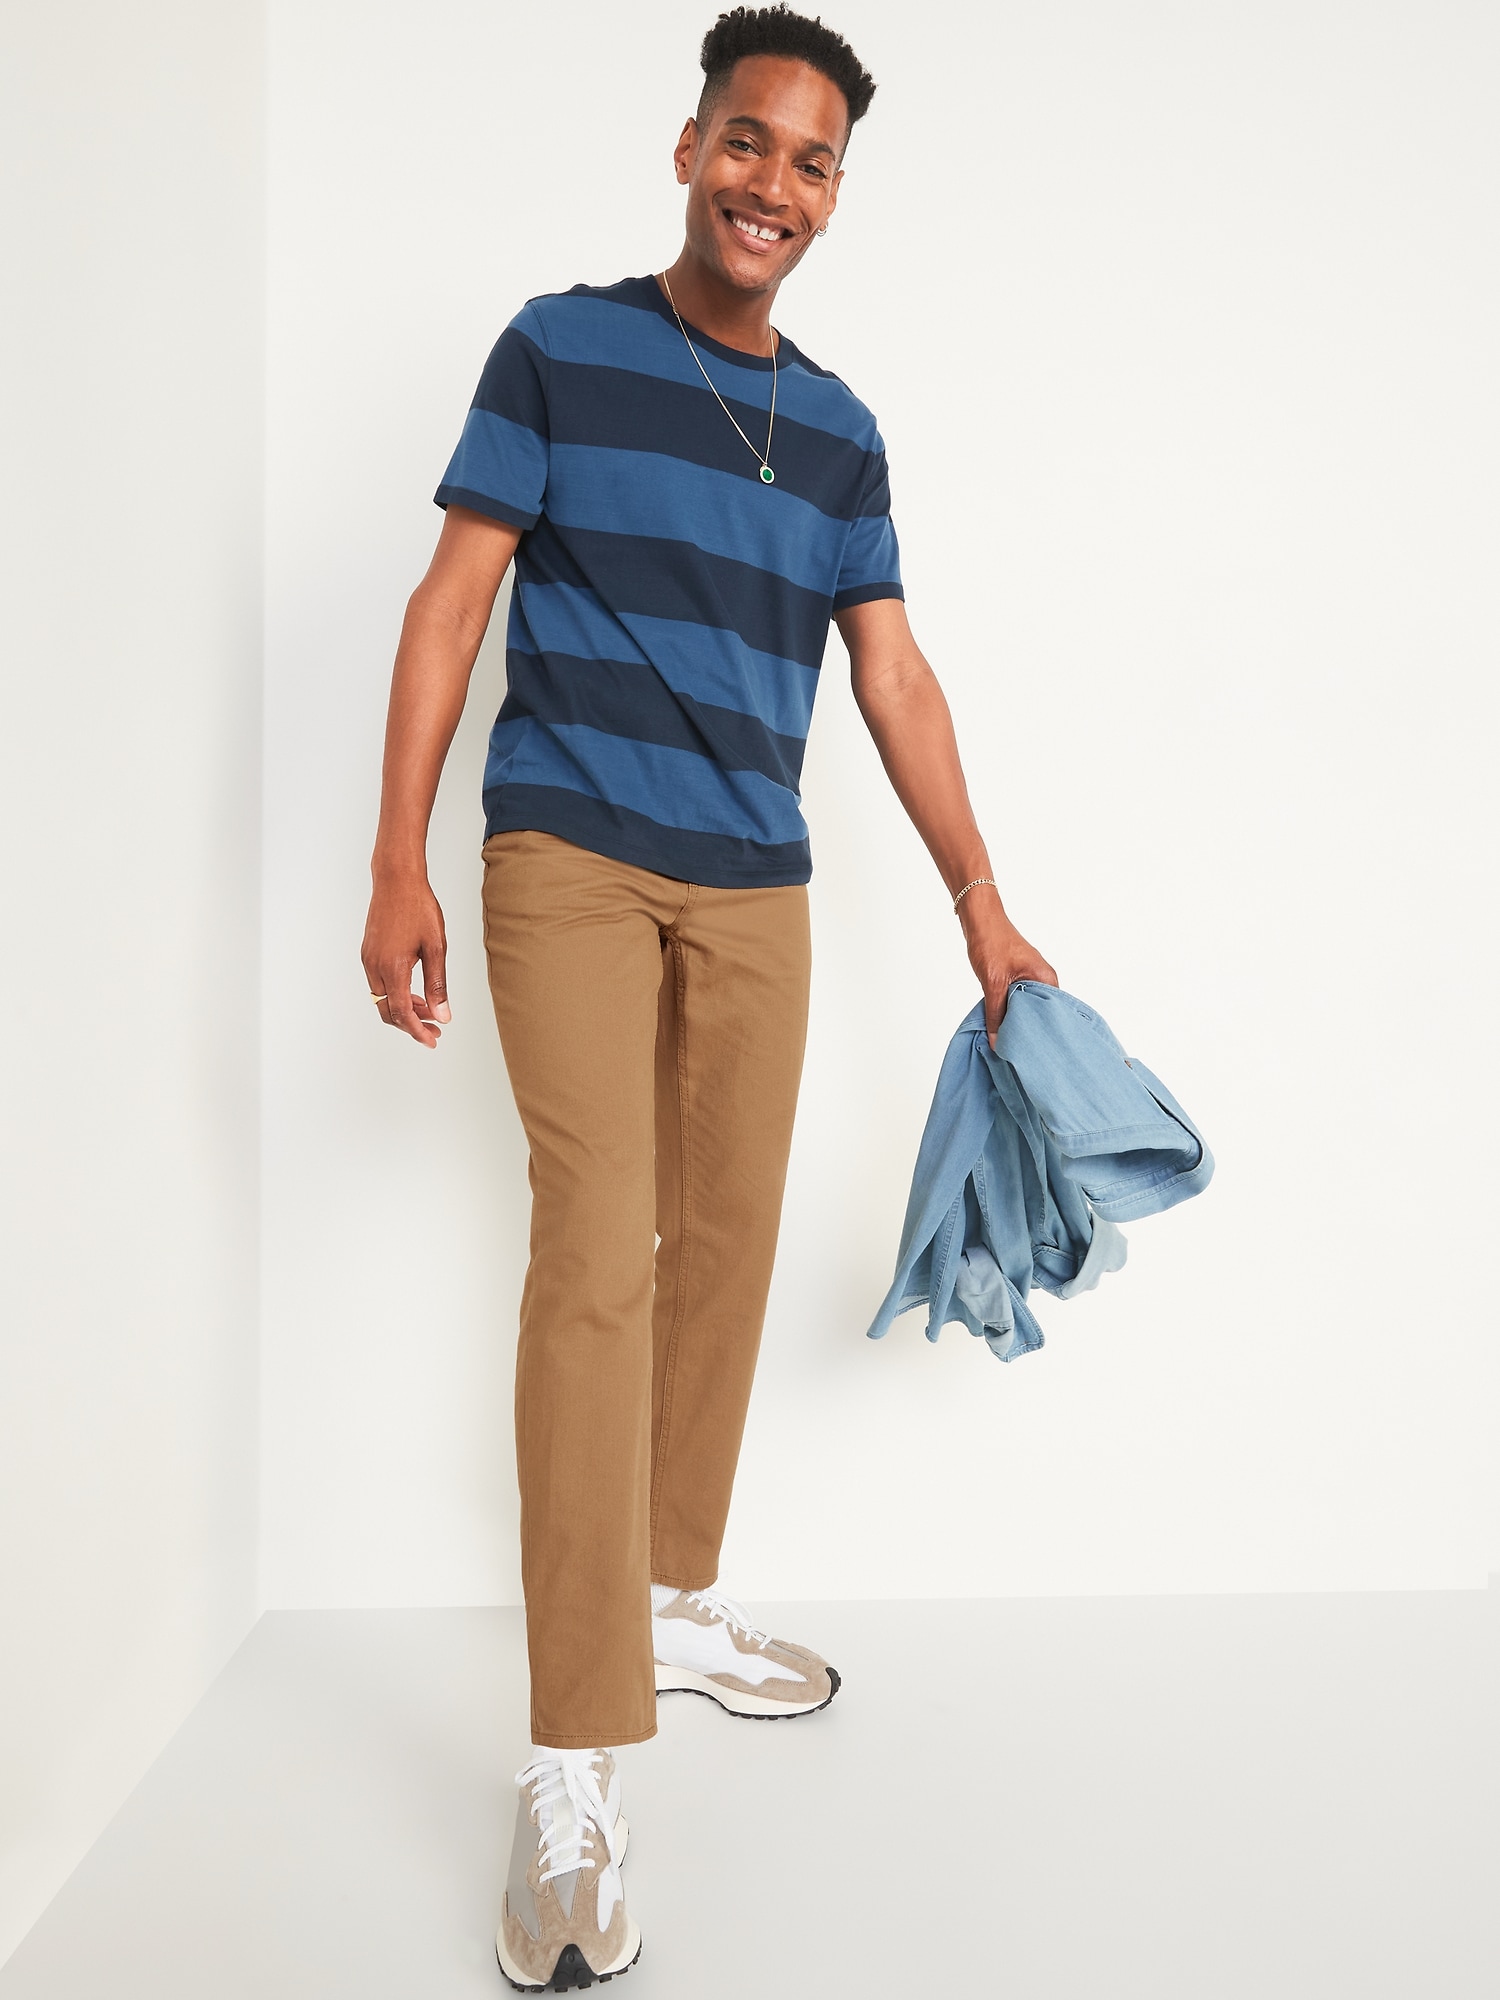 Wow Athletic Taper Non-Stretch Five-Pocket Pants for Men | Old Navy